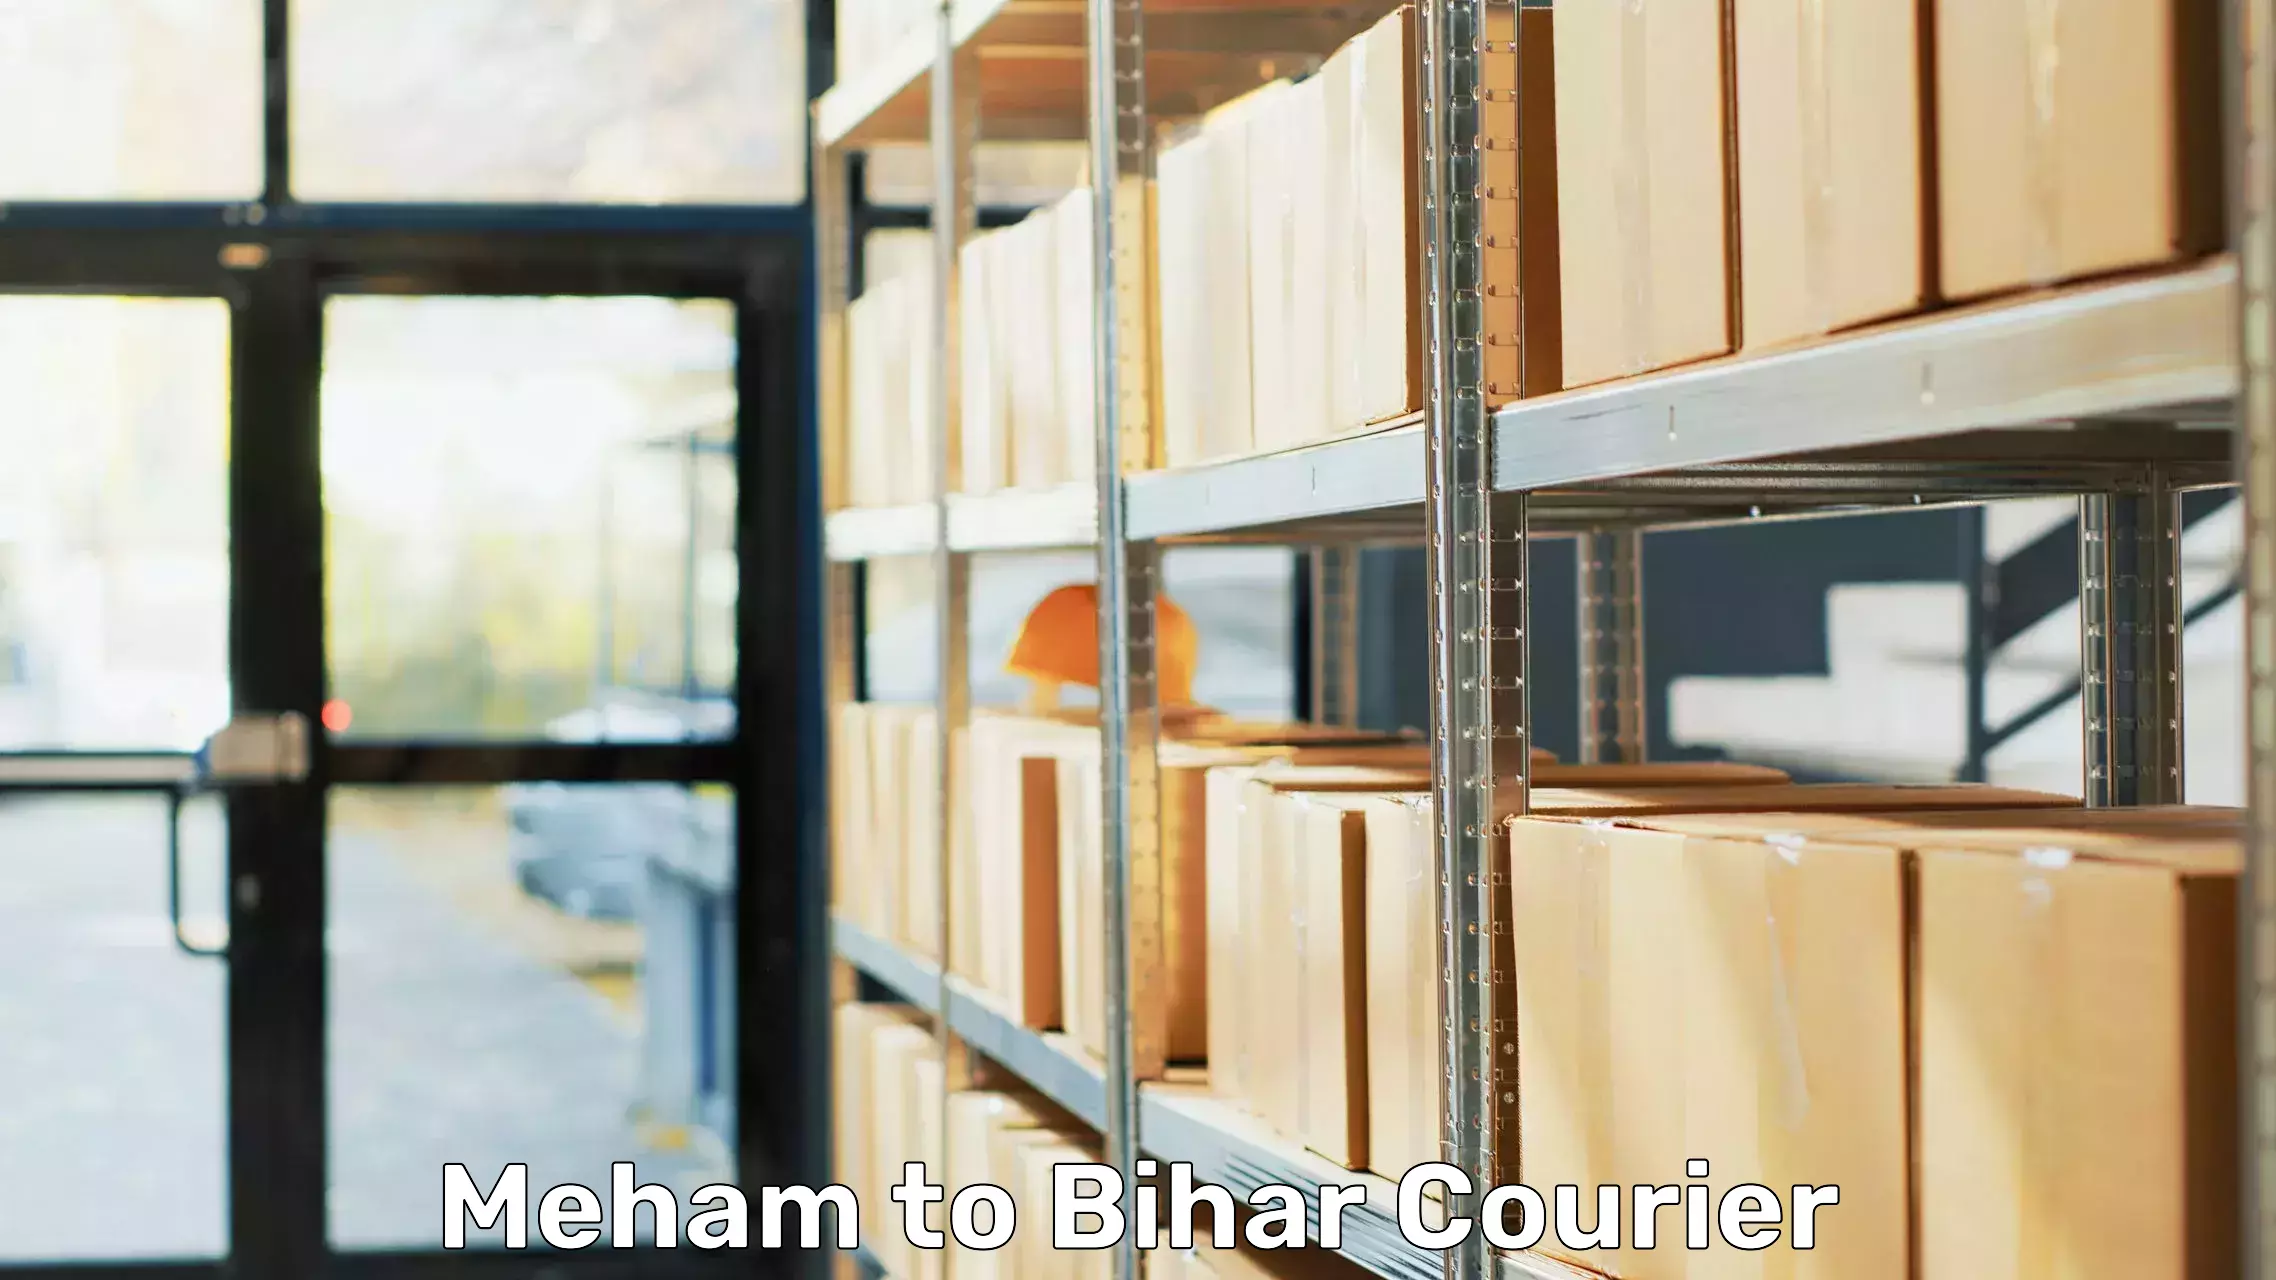 Trusted relocation experts Meham to Bihar